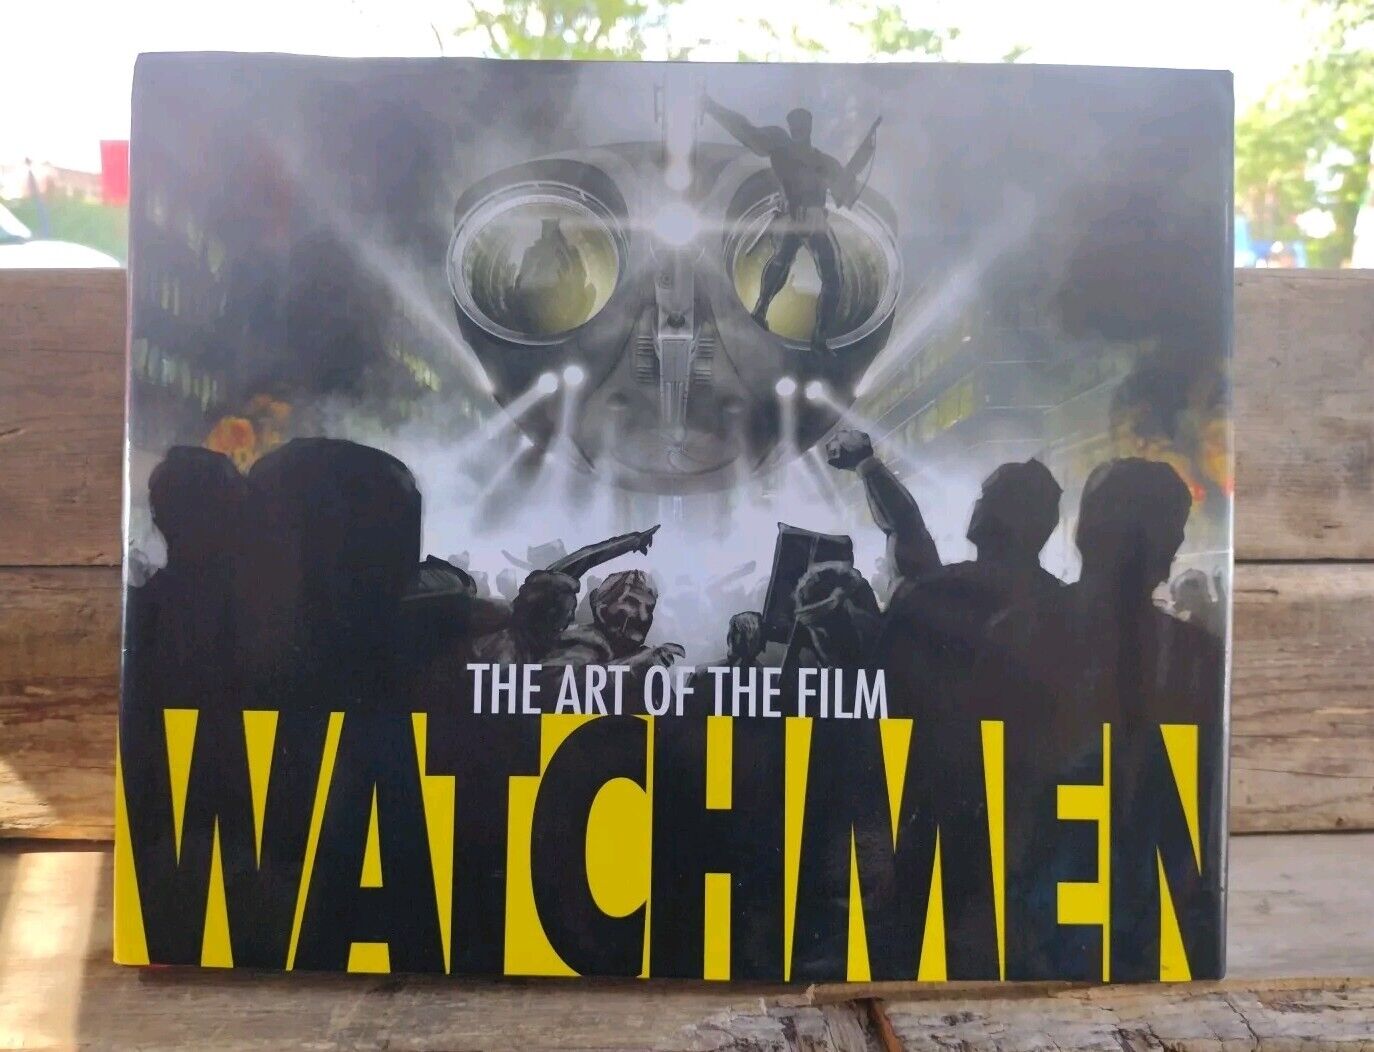 Watchmen The Art of the Film Hardcover Book 2009 Zack Snyder Movie DC Comics